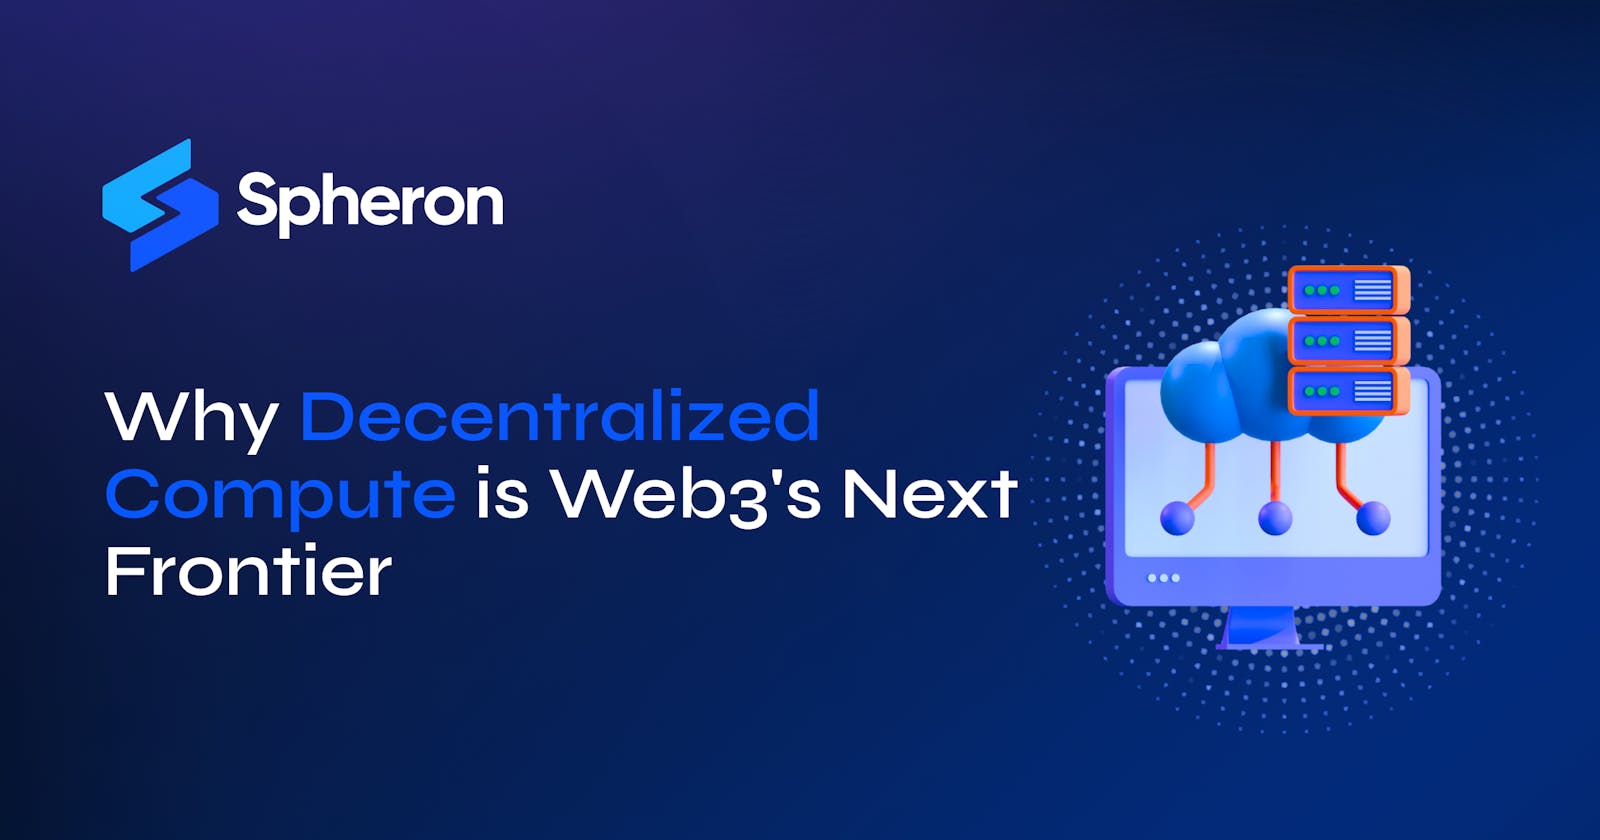 Why decentralized compute is Web3's next frontier